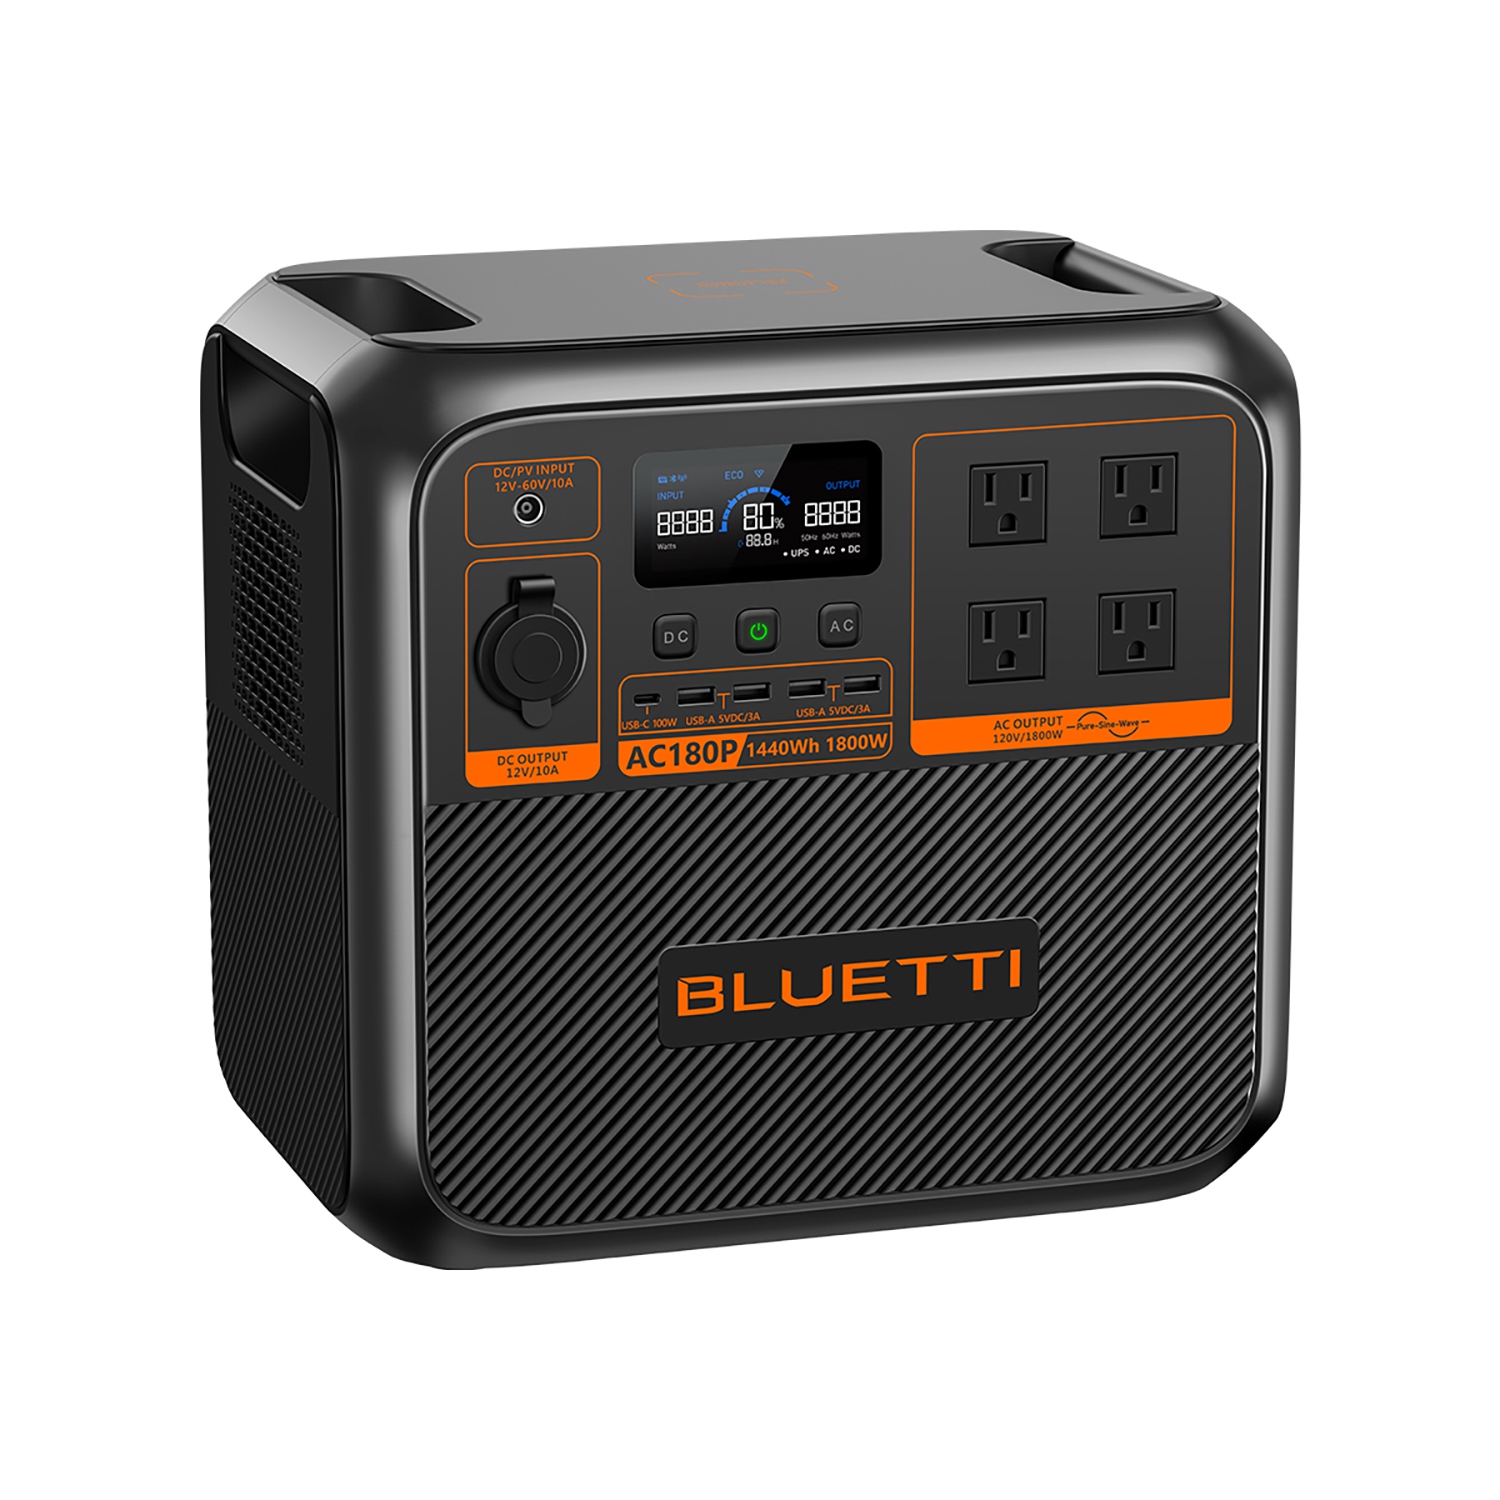 BLUETTI AC180P 1800W Portable Solar Generator 1440Wh LiFePO4 Power Station for Camping, Power Outages, Off-Grid Living